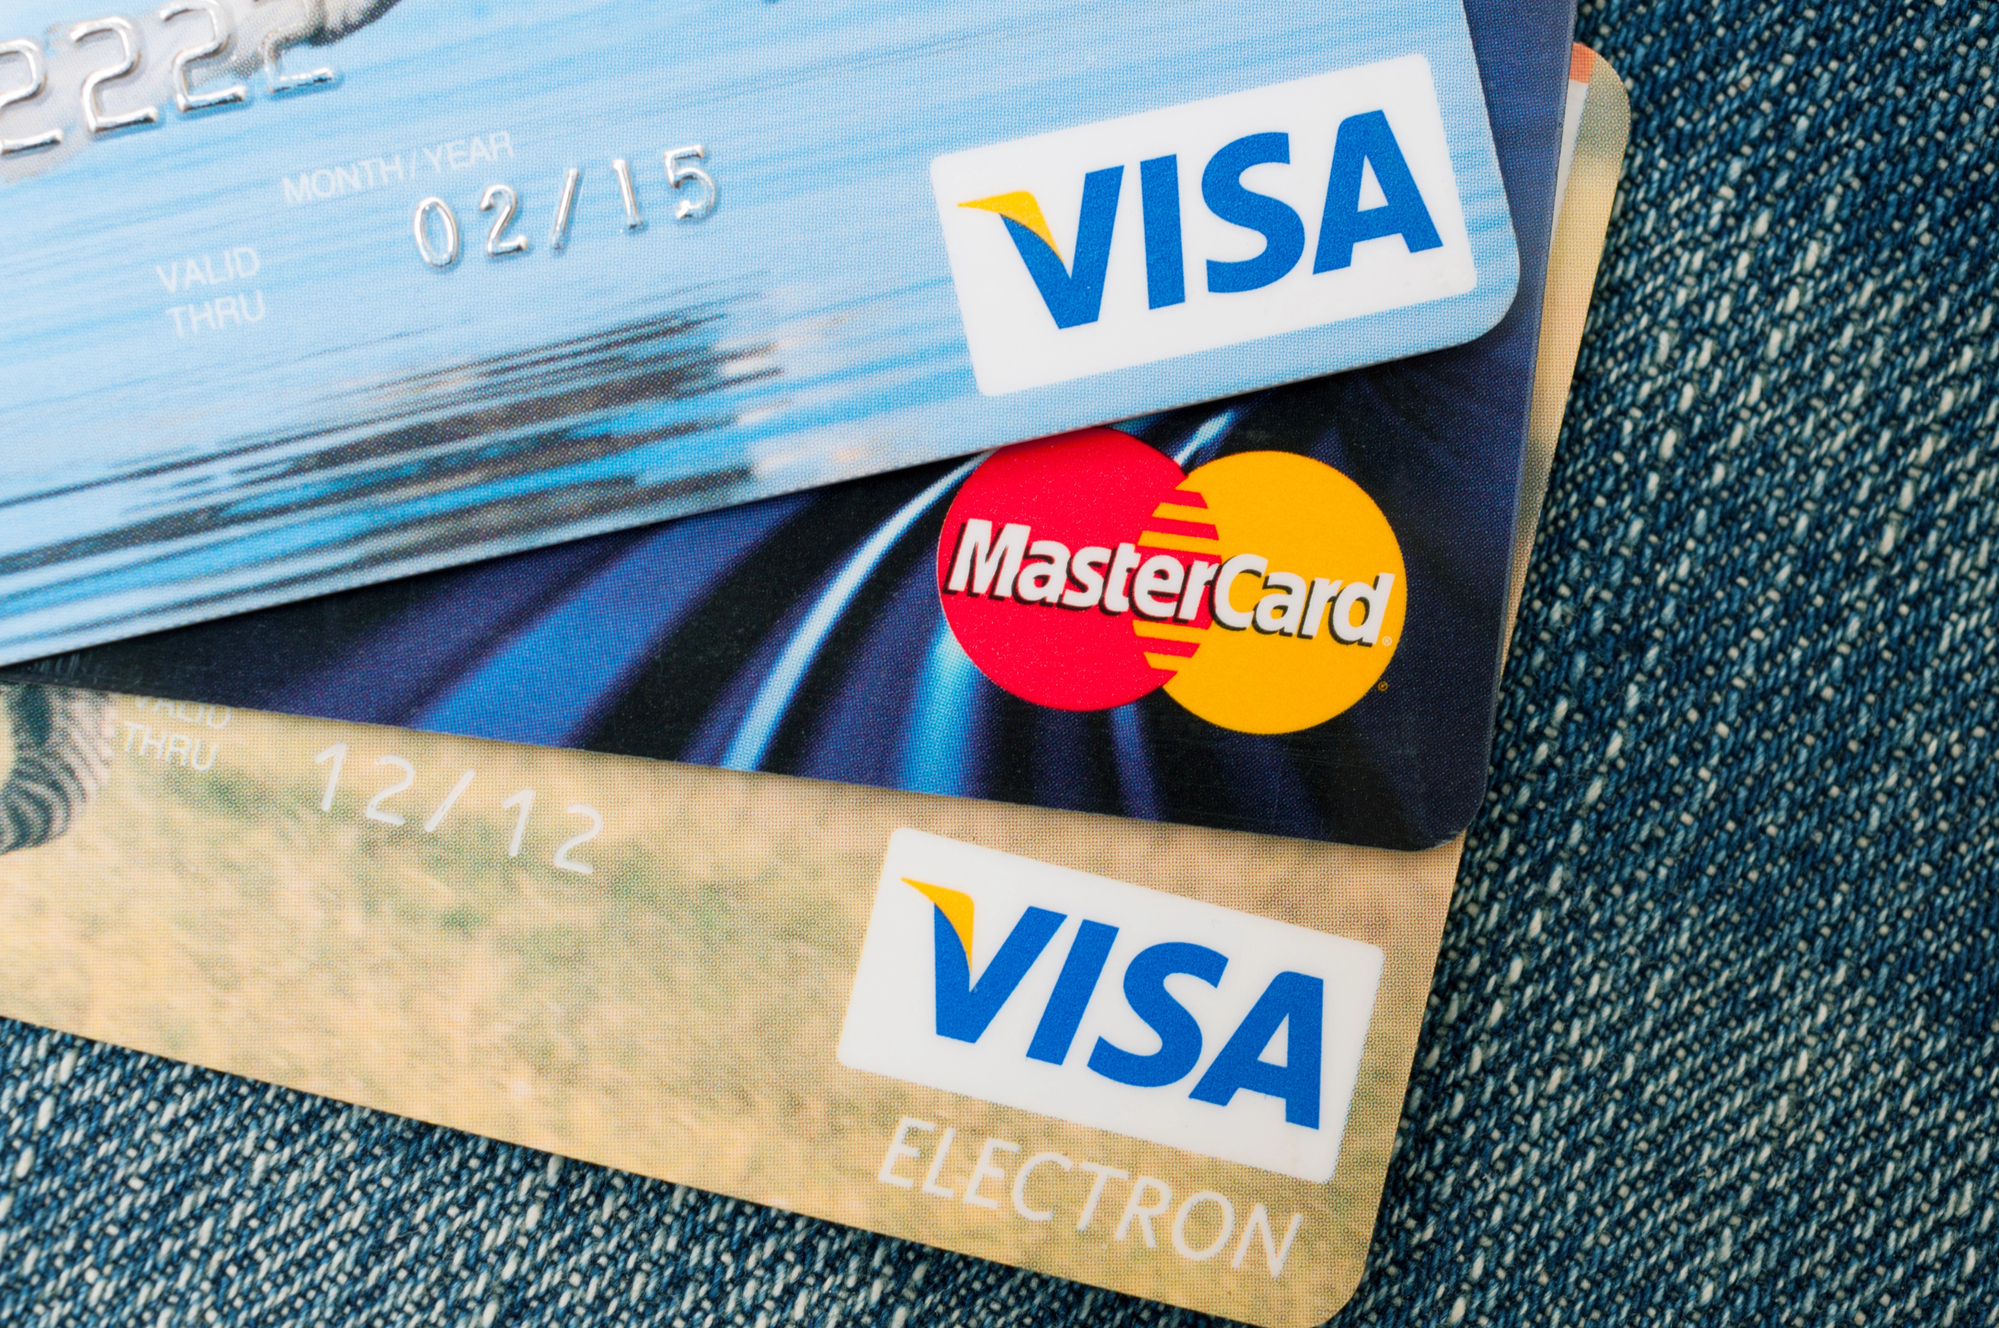 A New Federal Rule Will Cap Most Credit Card Late Fees at $8. Here’s What We Know.